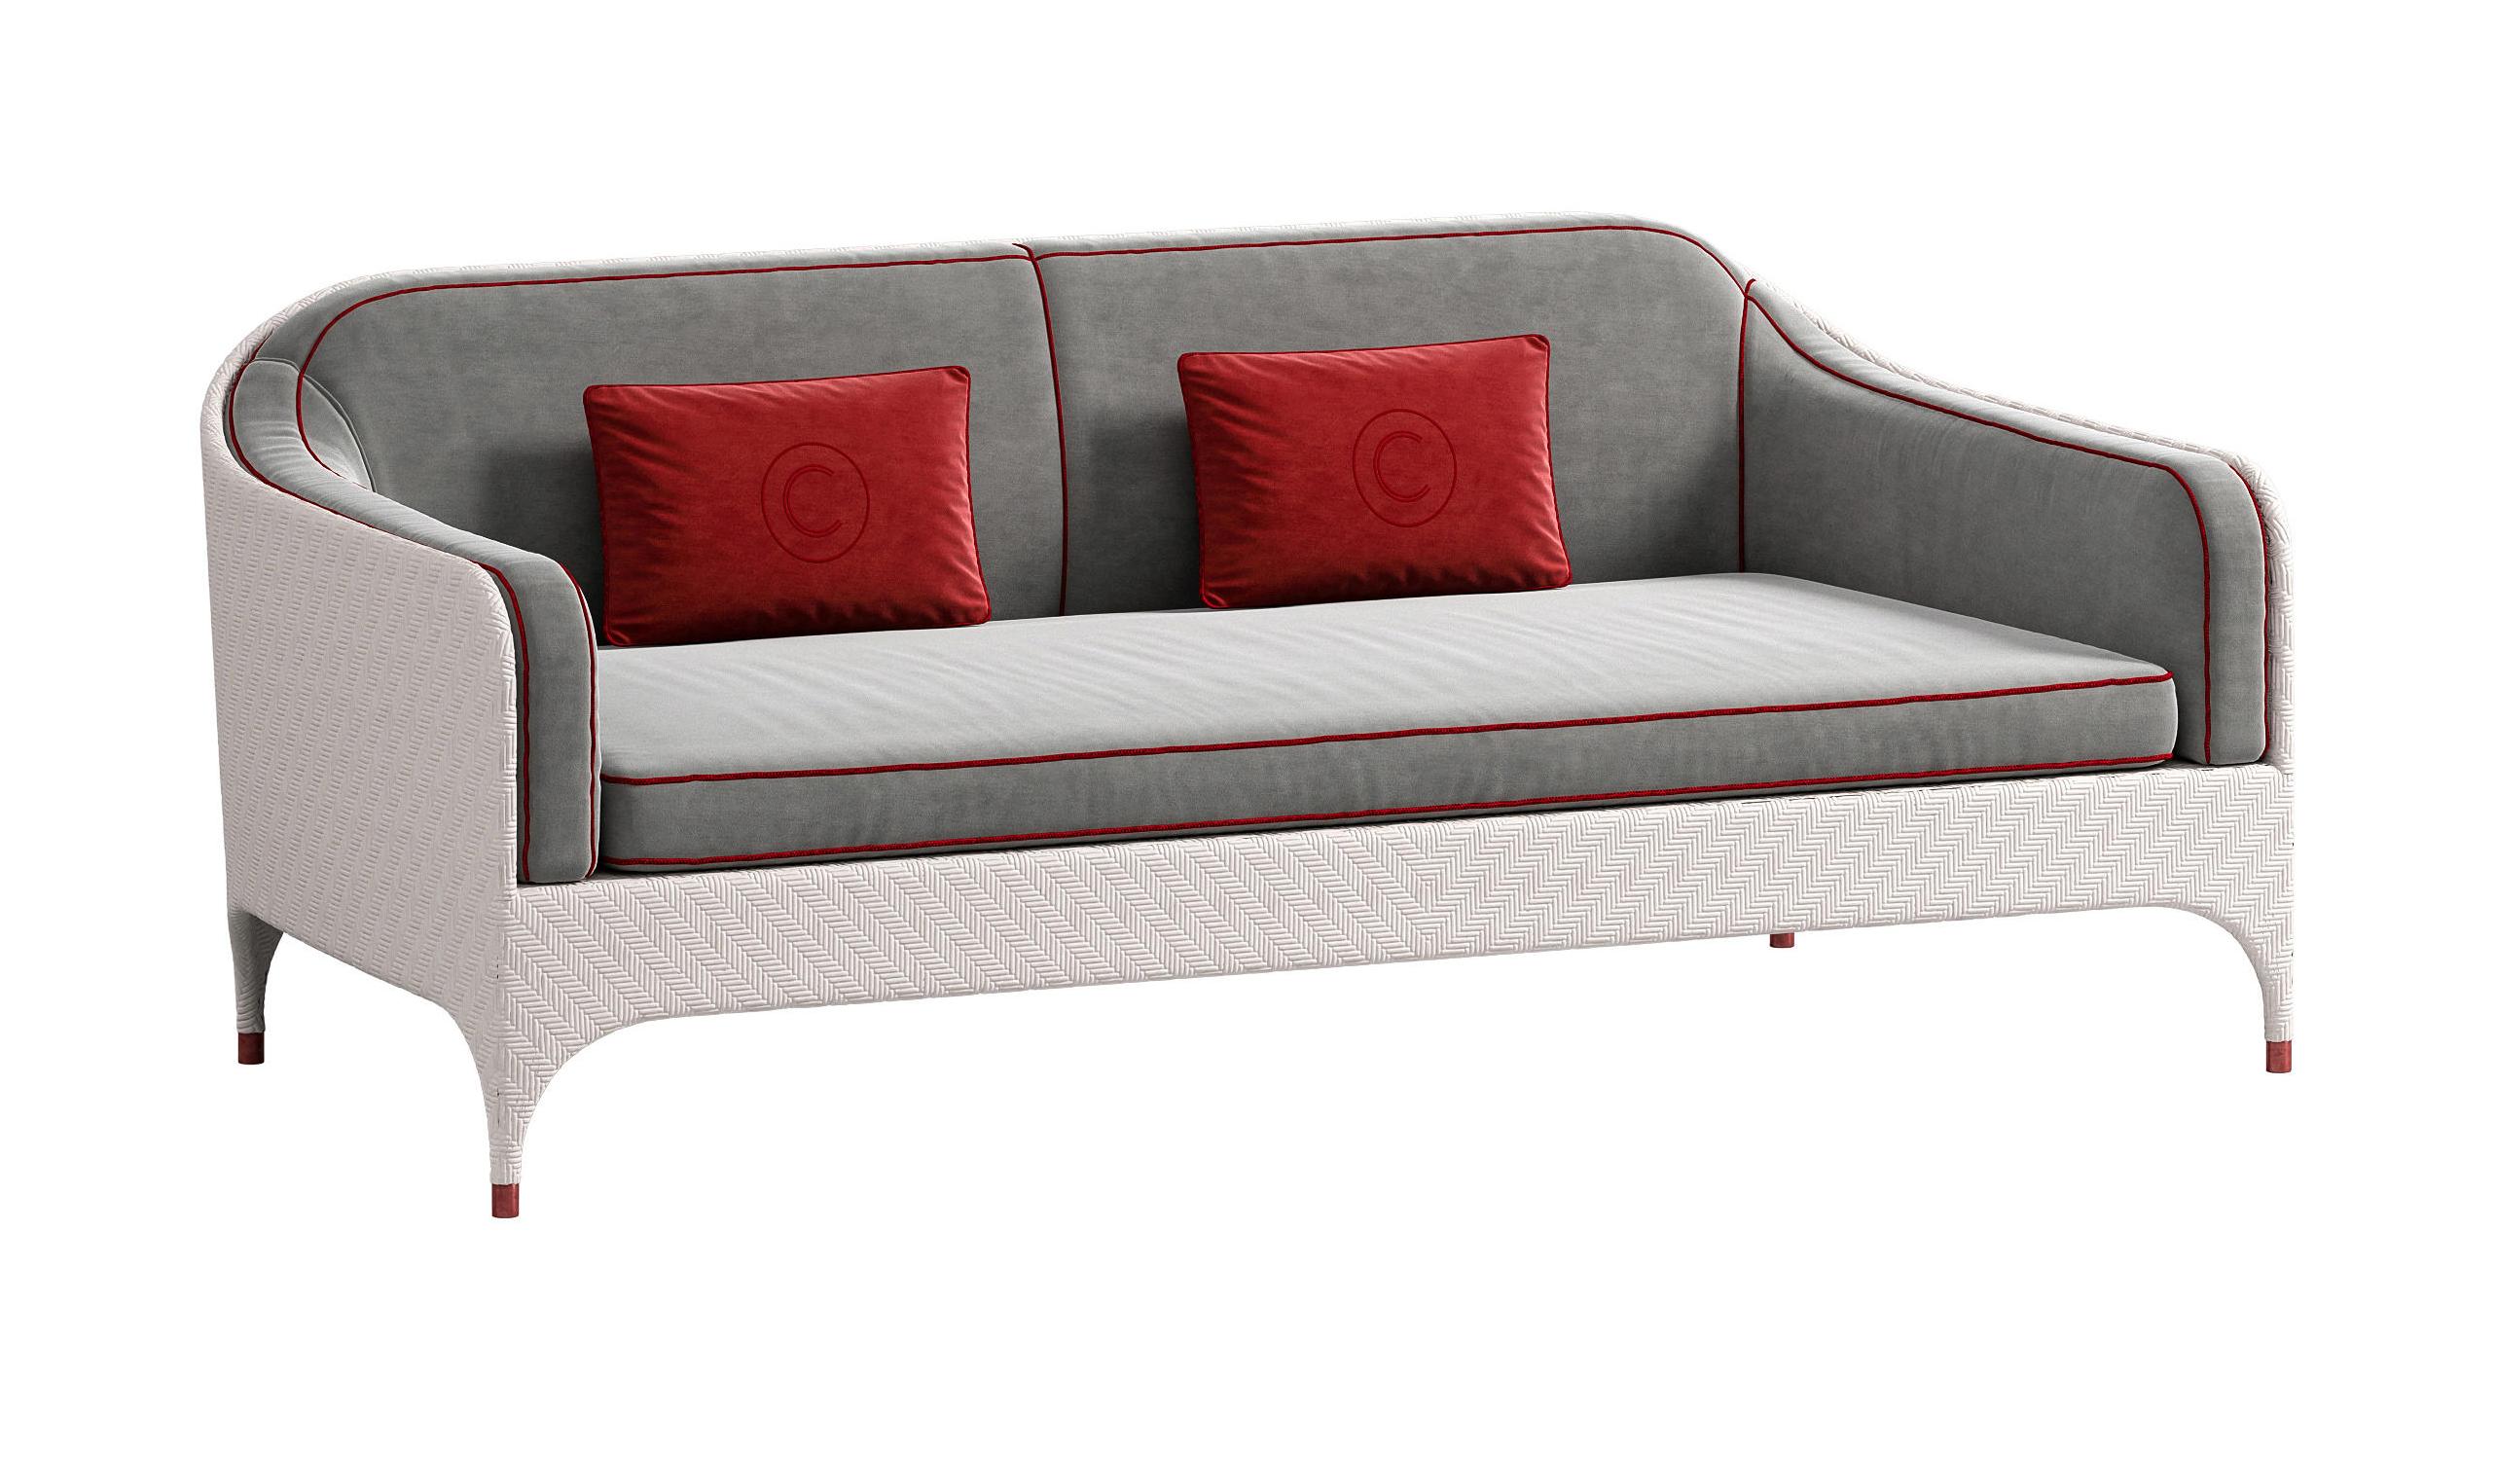 Two-Seater Outdoor Sofa With Armrests